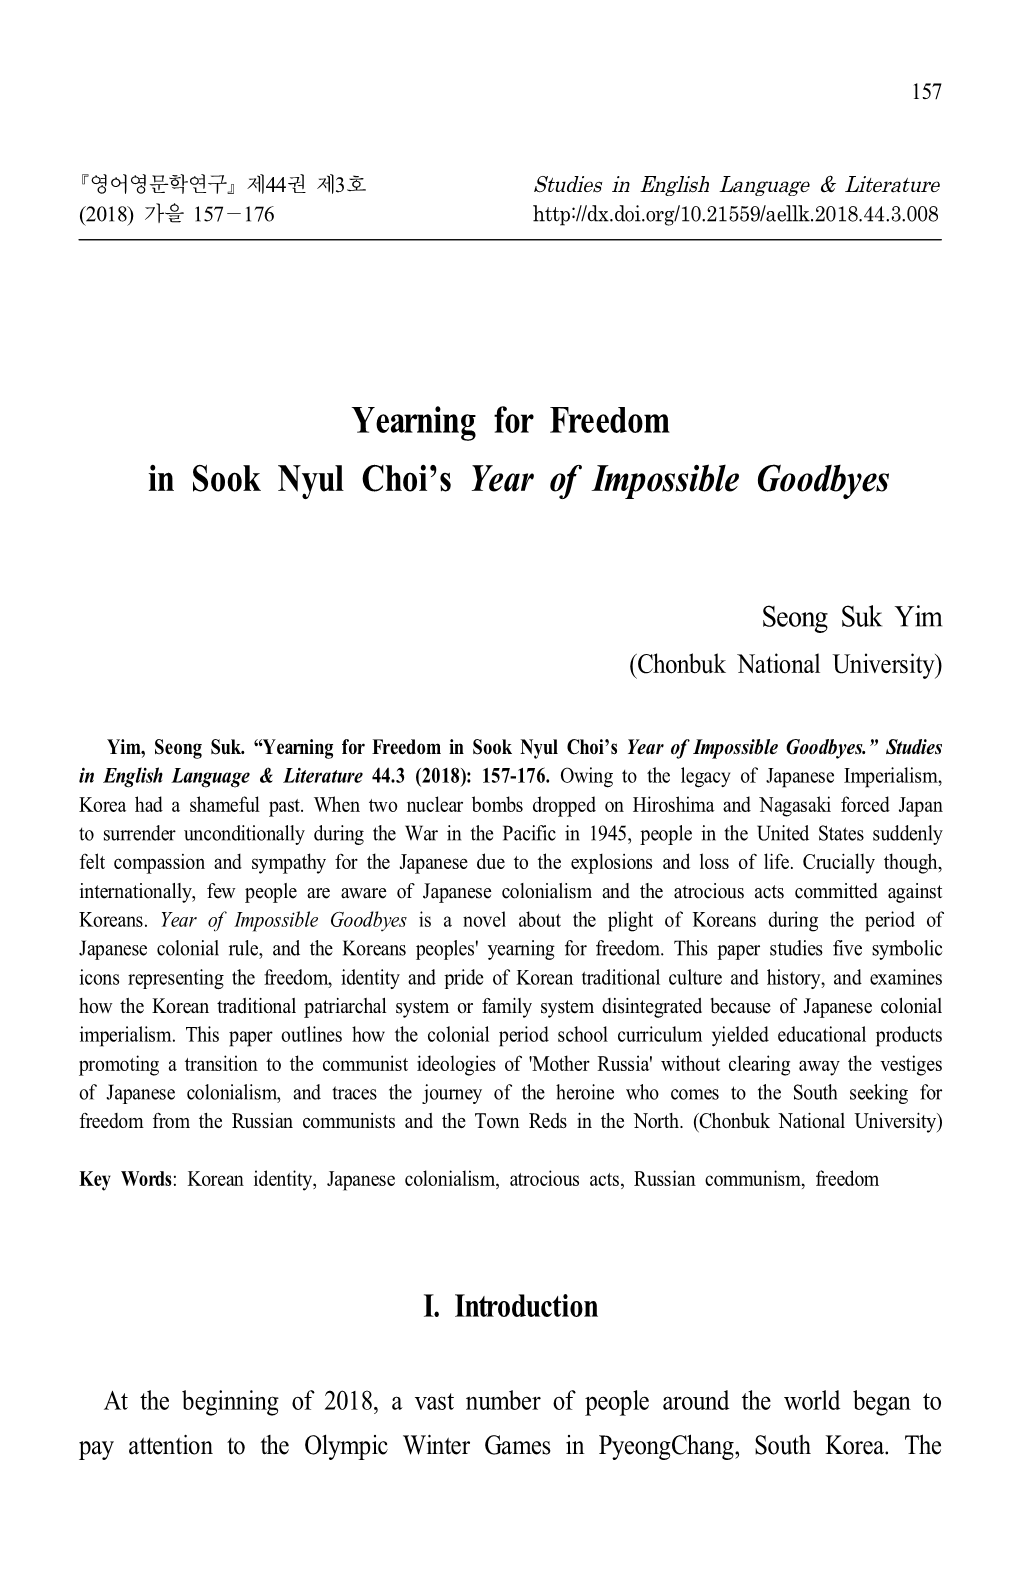 Yearning for Freedom in Sook Nyul Choi's Year of Impossible Goodbyes